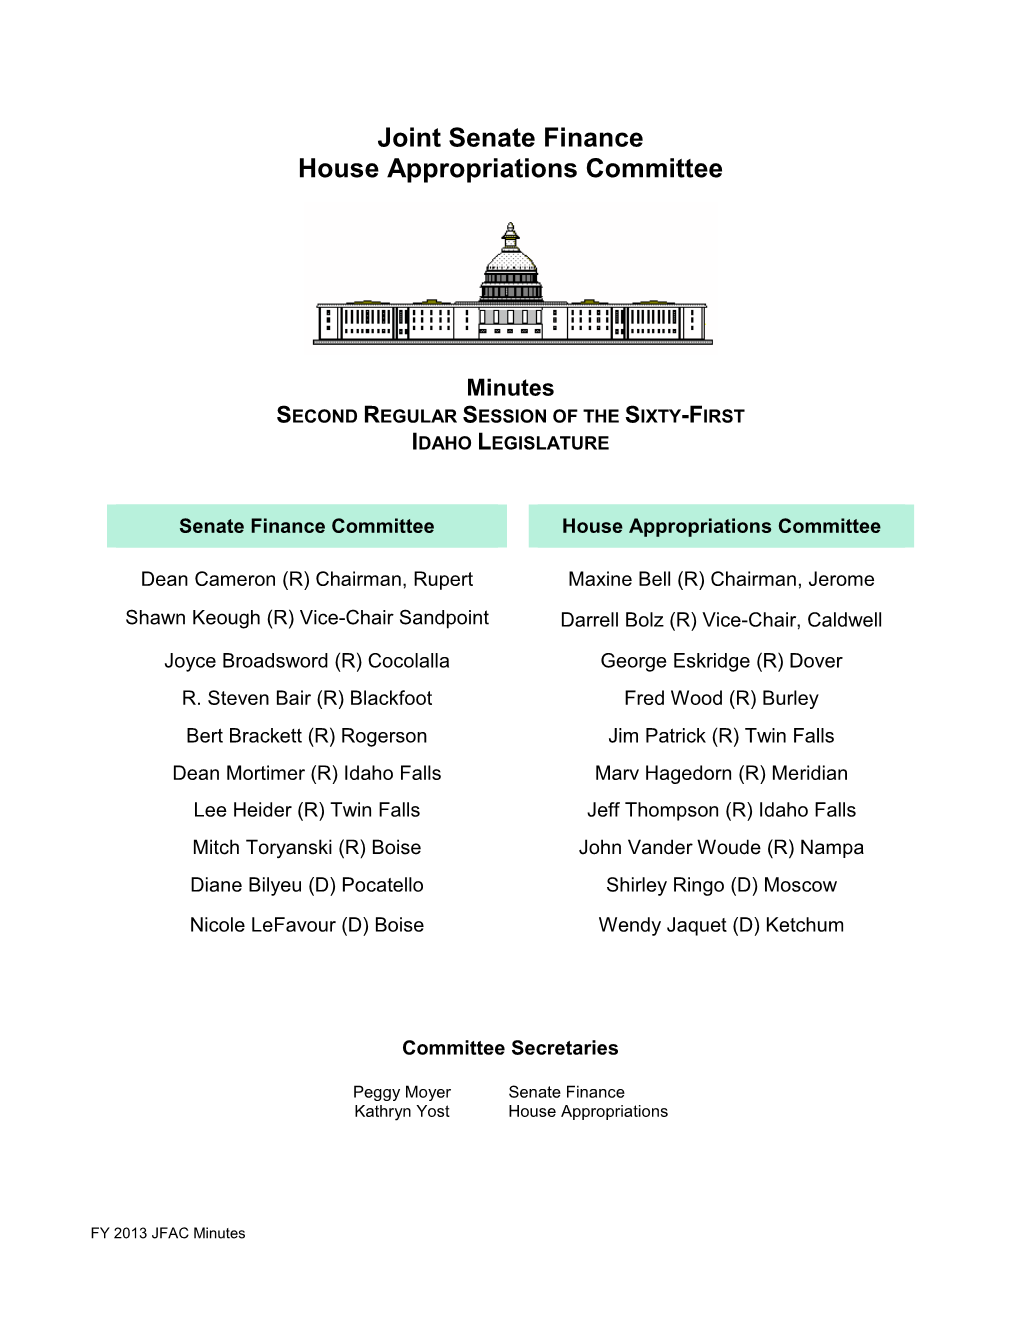 Joint Senate Finance House Appropriations Committee